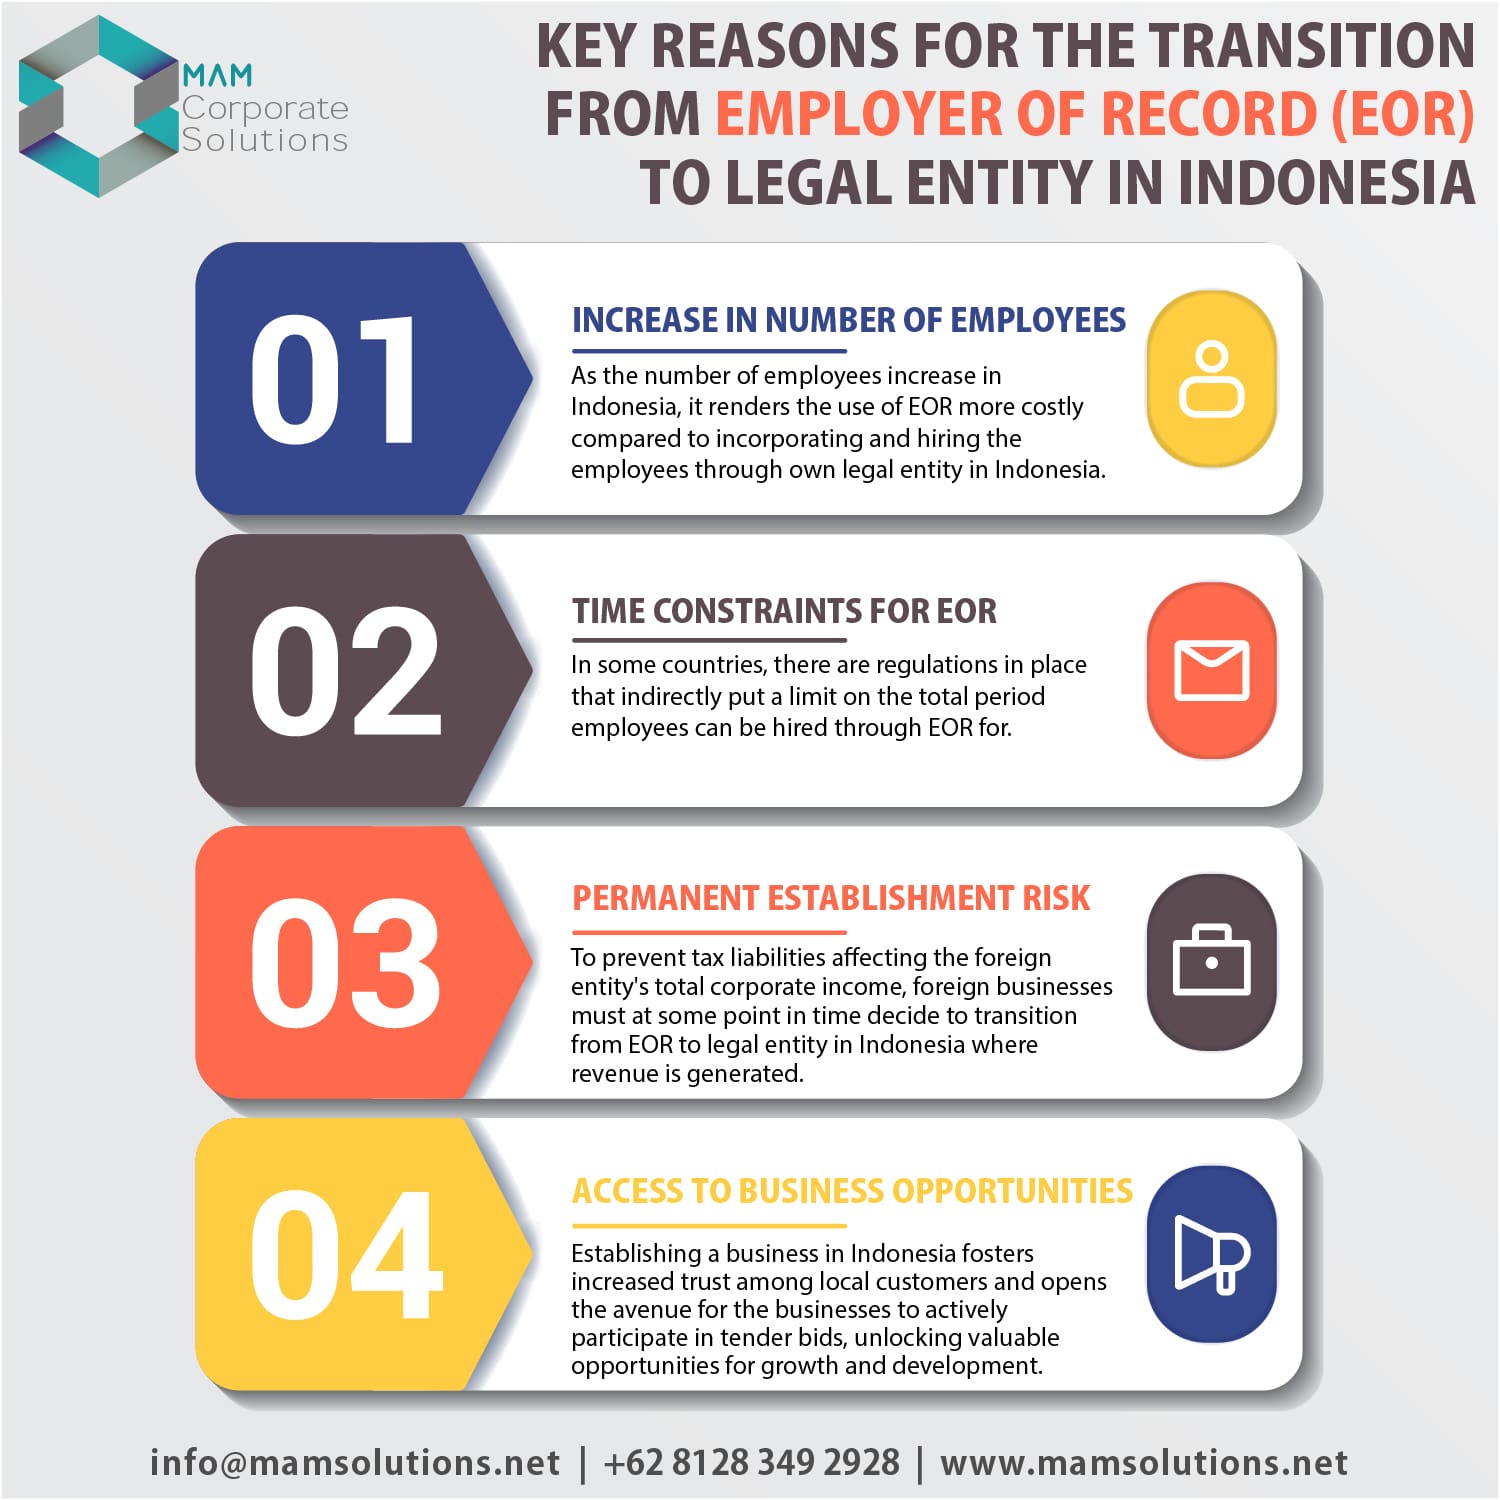 Key reasons for transition to legal entity